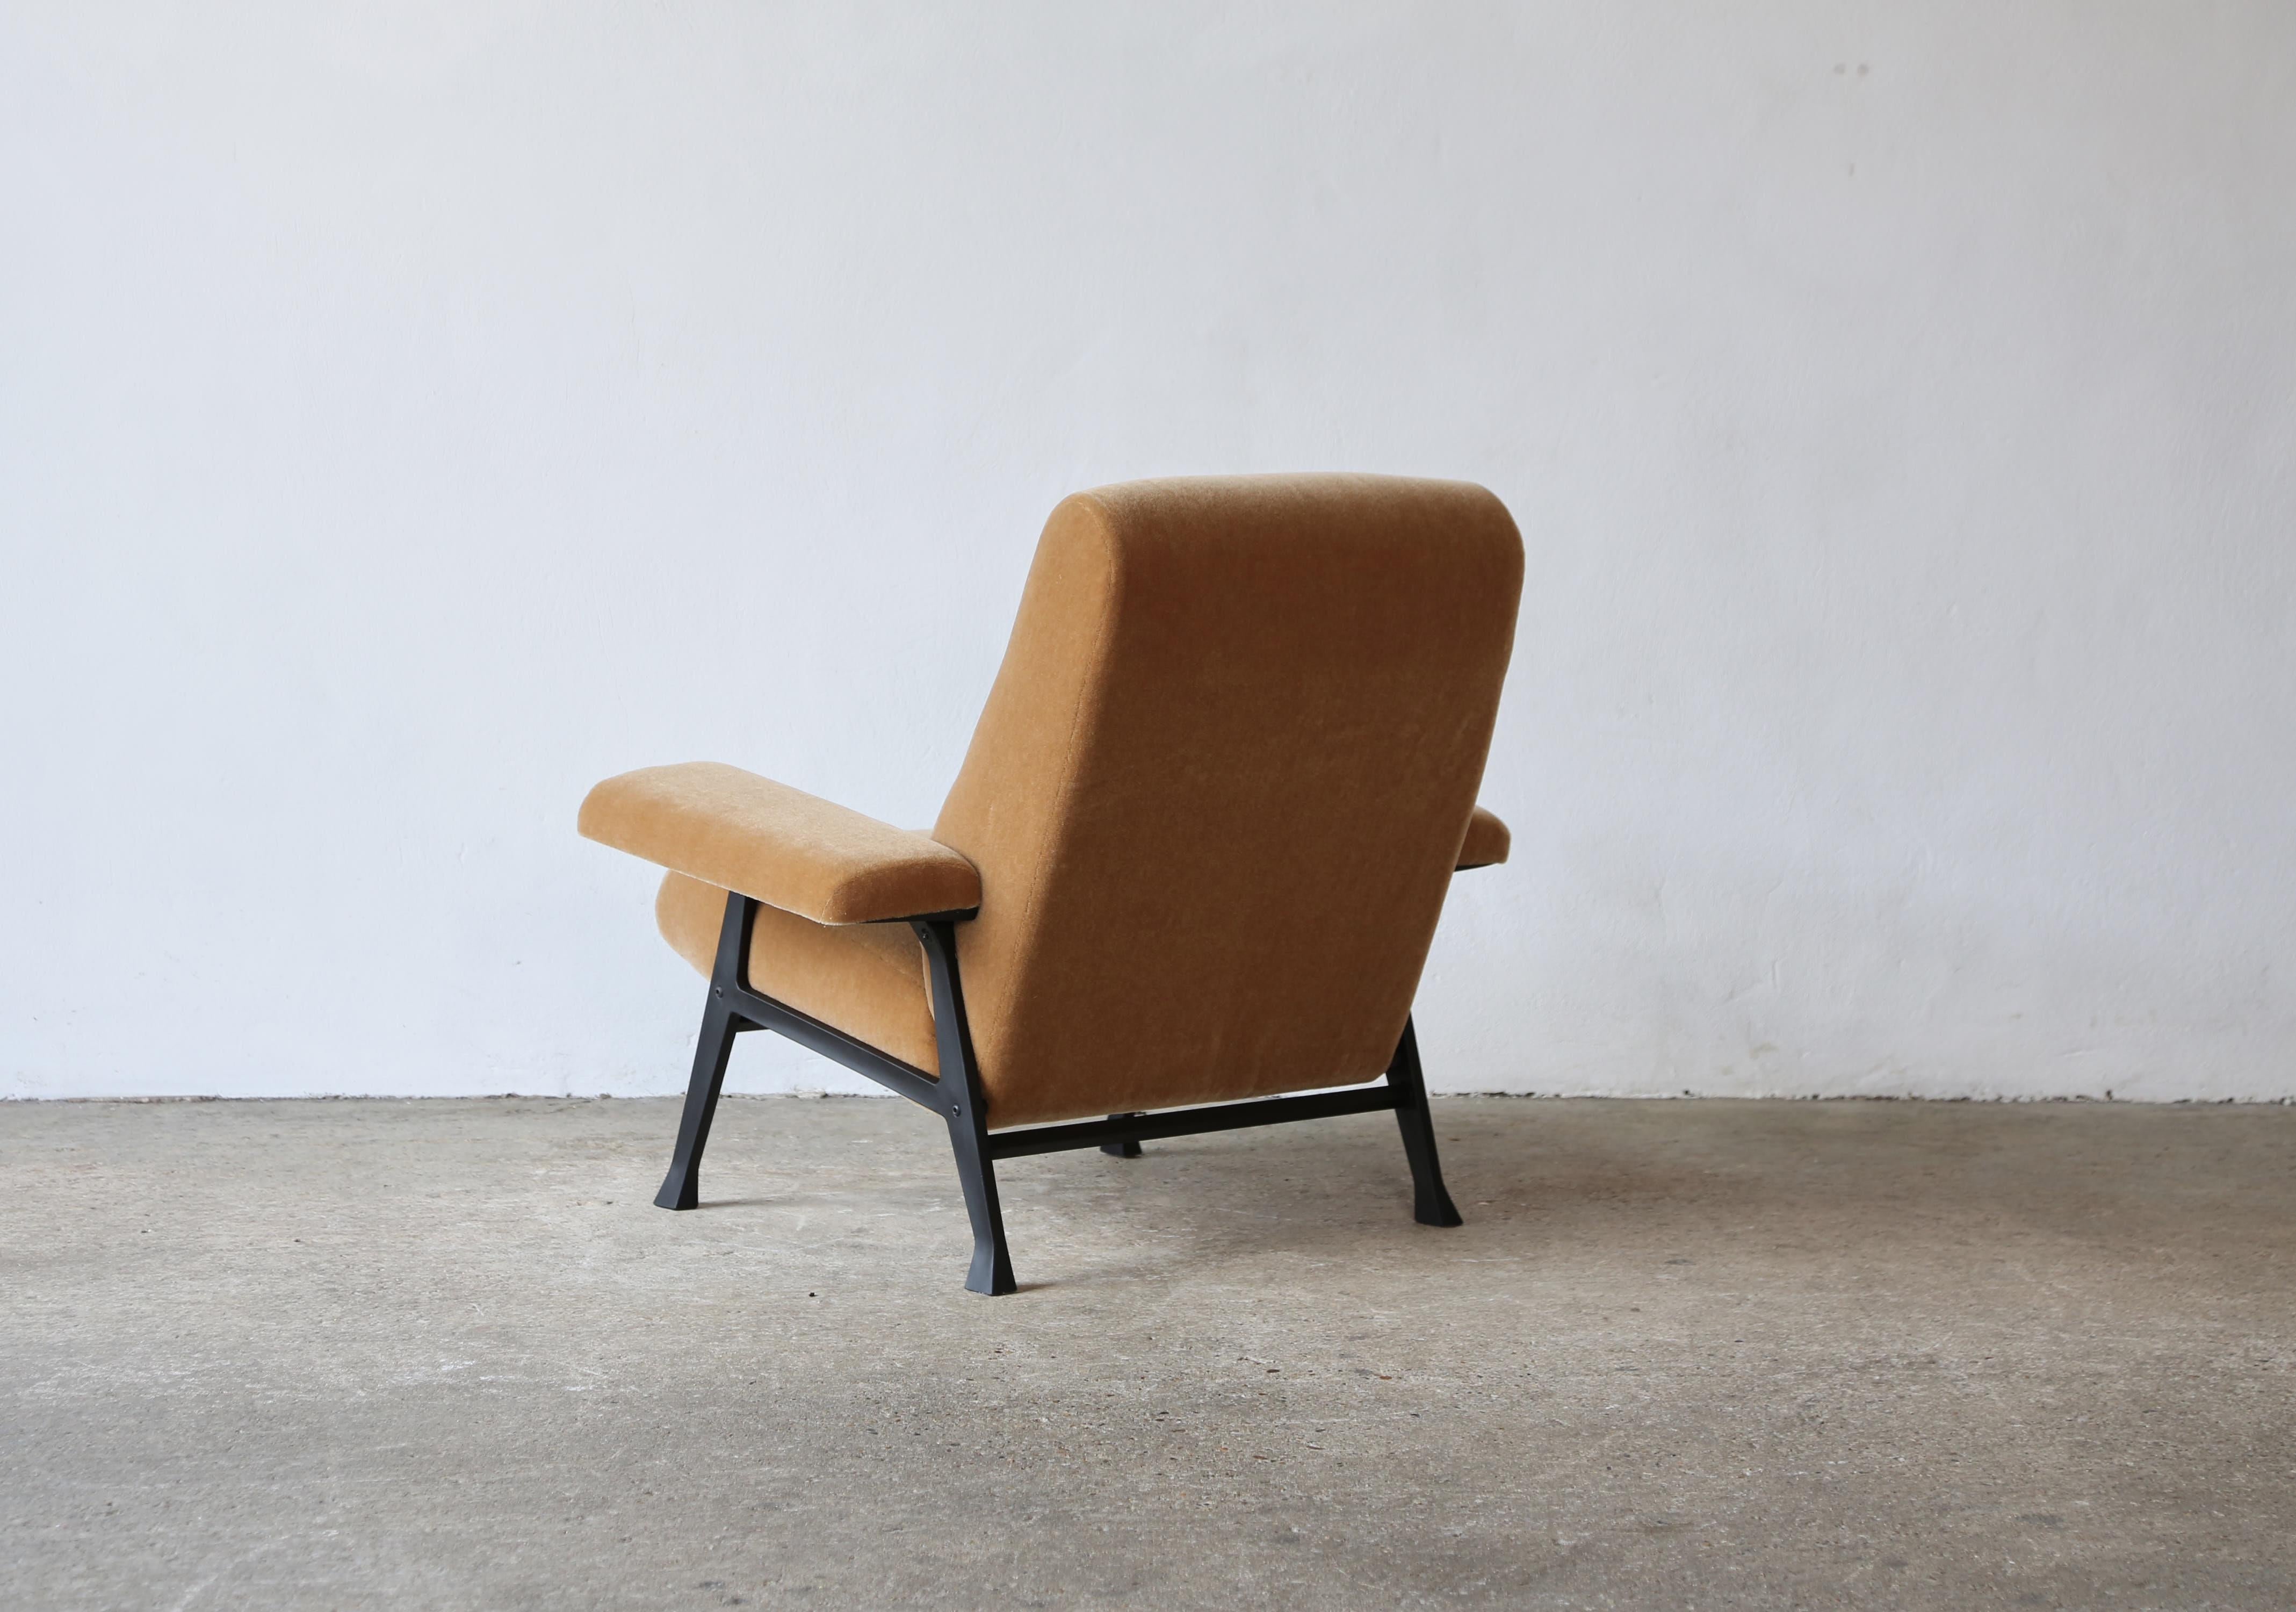 20th Century Rare Roberto Menghi Hall Chair, Arflex, Italy, 1950s, Upholstered in Pure Mohair